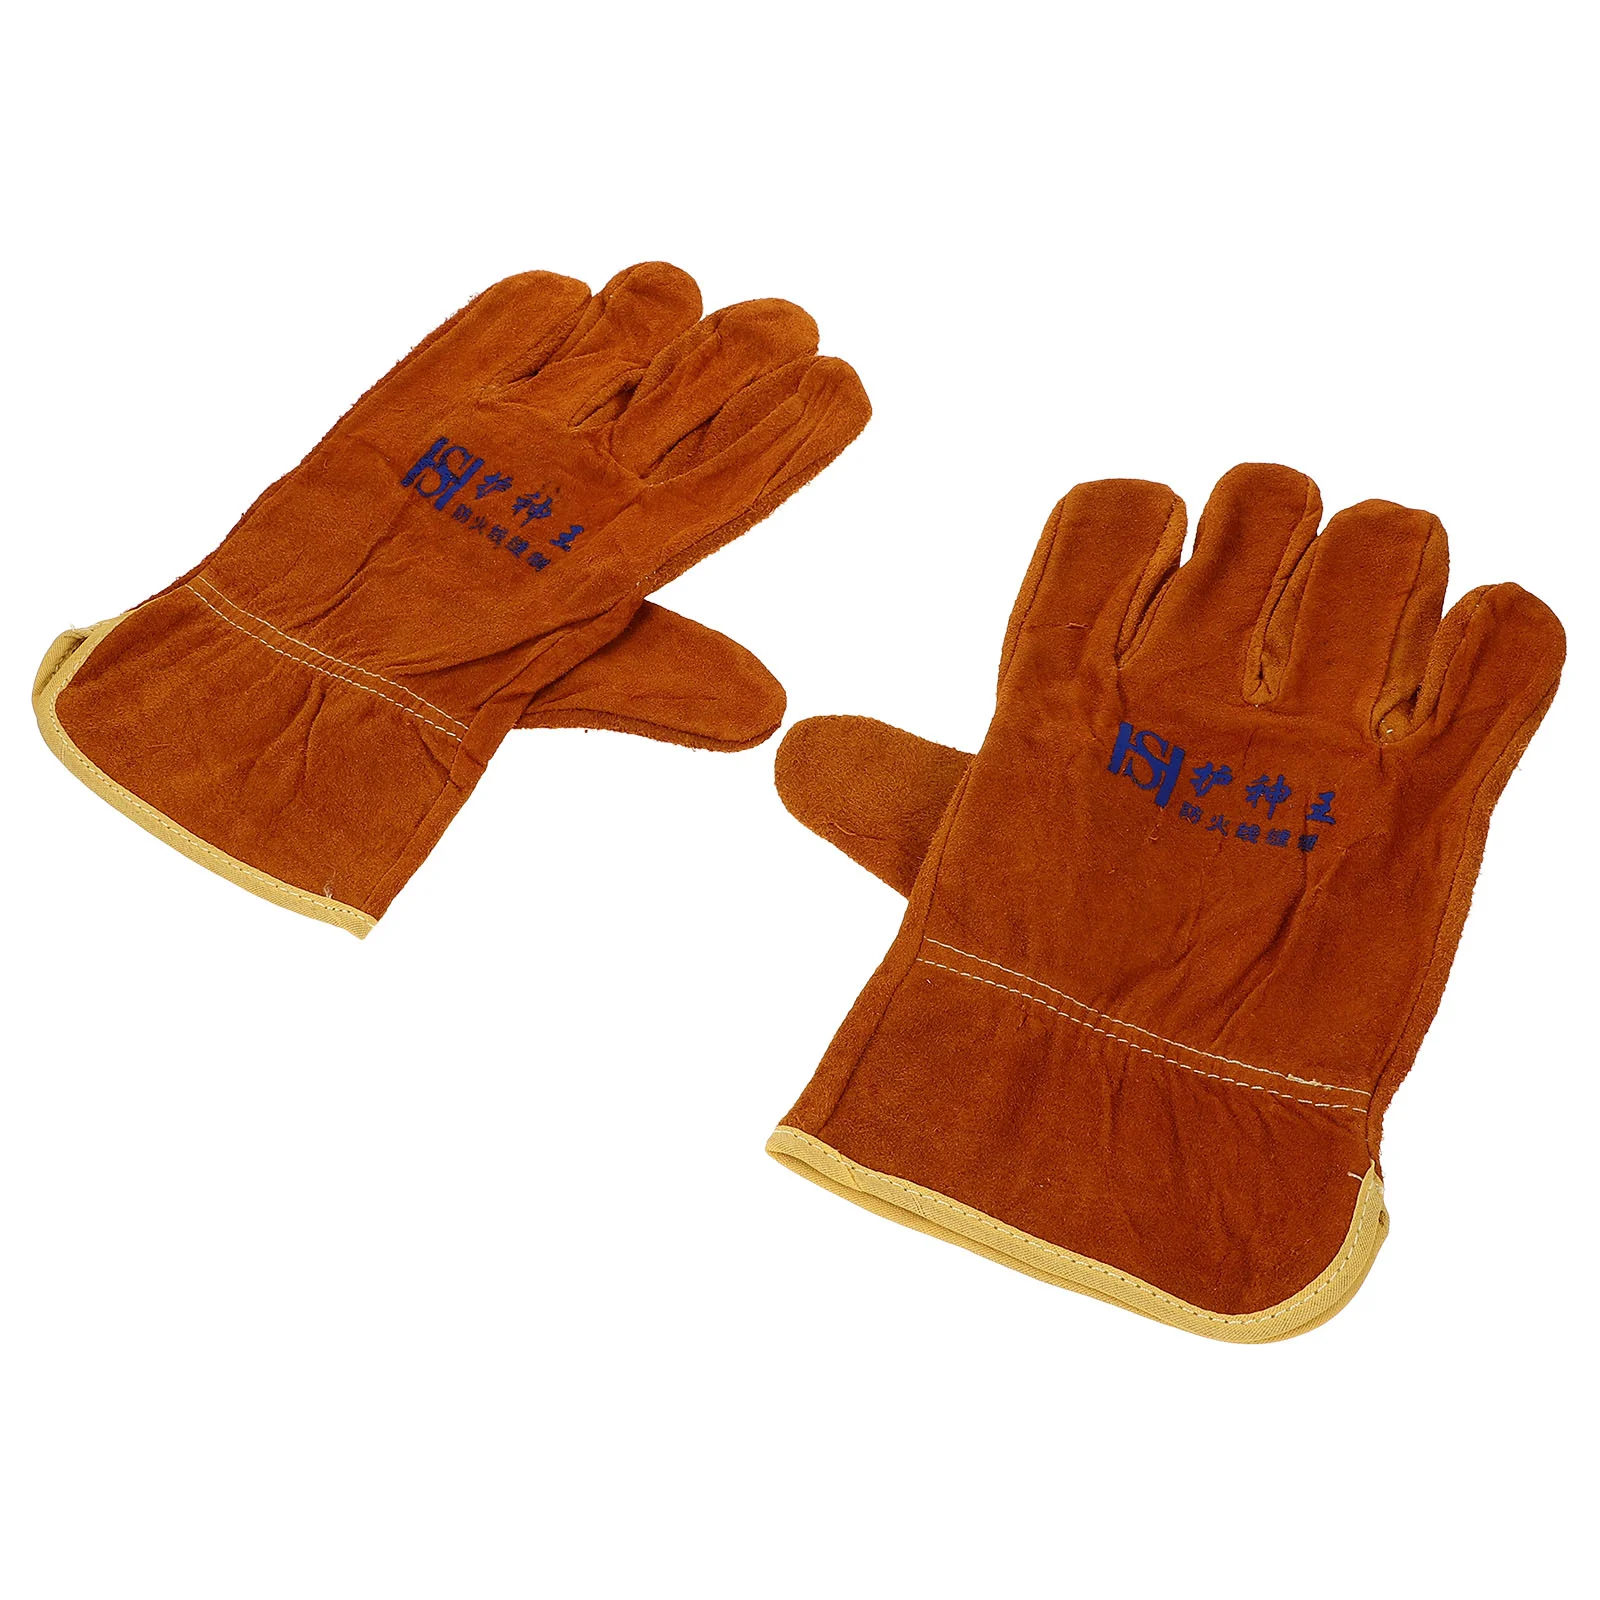 

Insulation Gloves Wear Resistant Welder Welding Double-layer Cowhide Heat Safety Biker Men Fireplace Gauntlets And protection